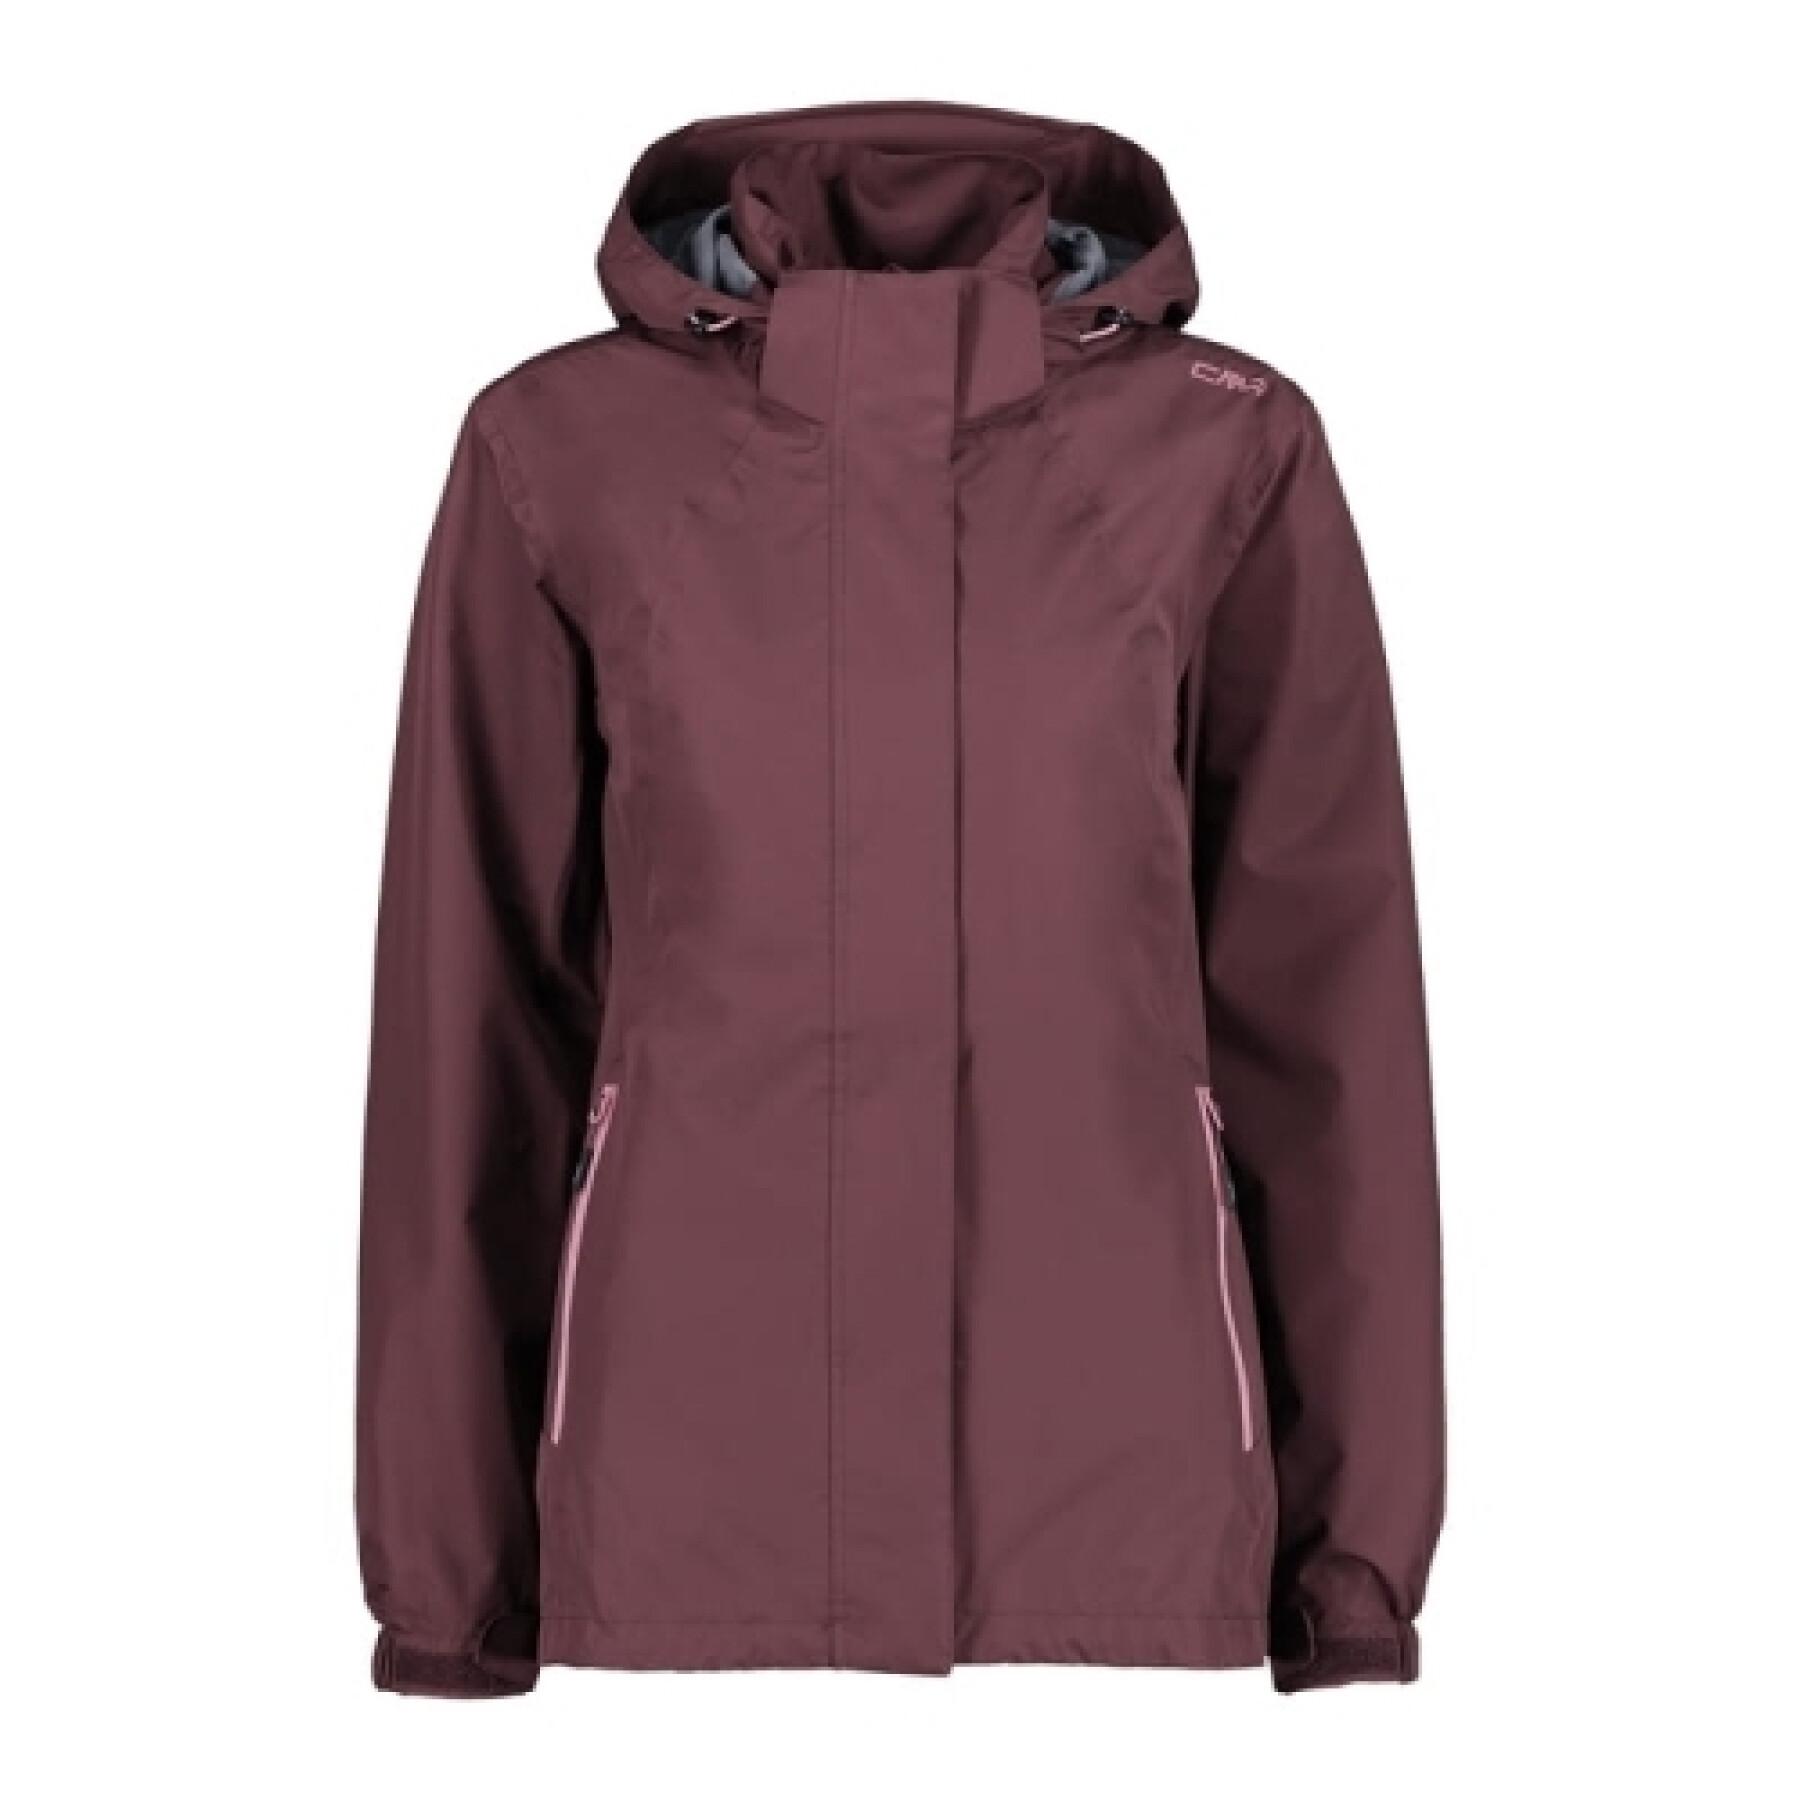 Waterproof hooded jacket with ventilation for women CMP